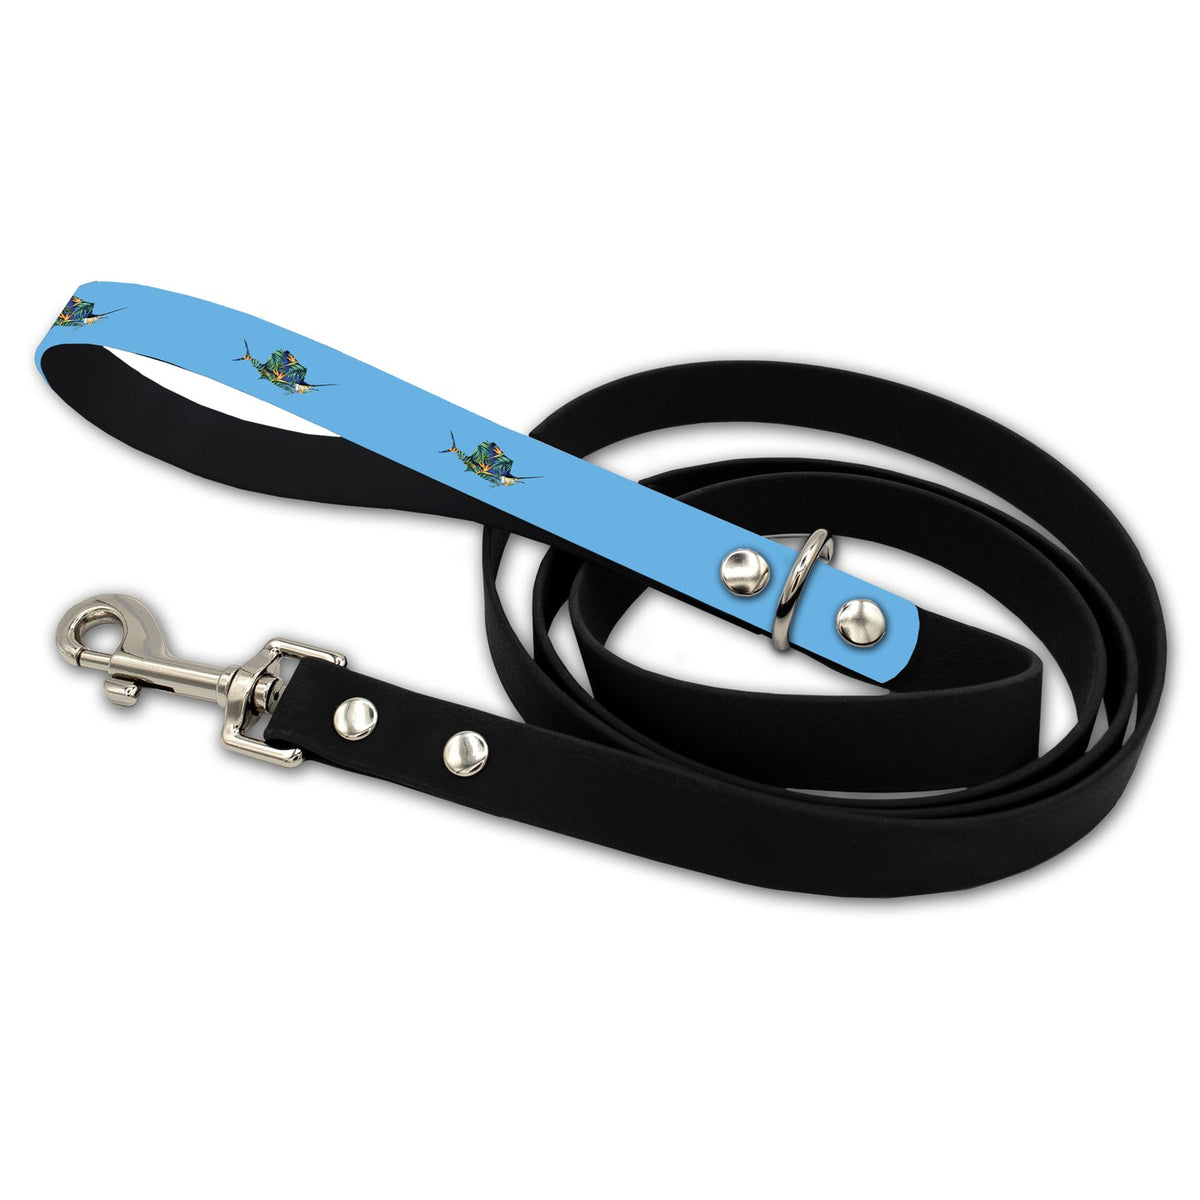 SCALES Fly Sail Pet Leash